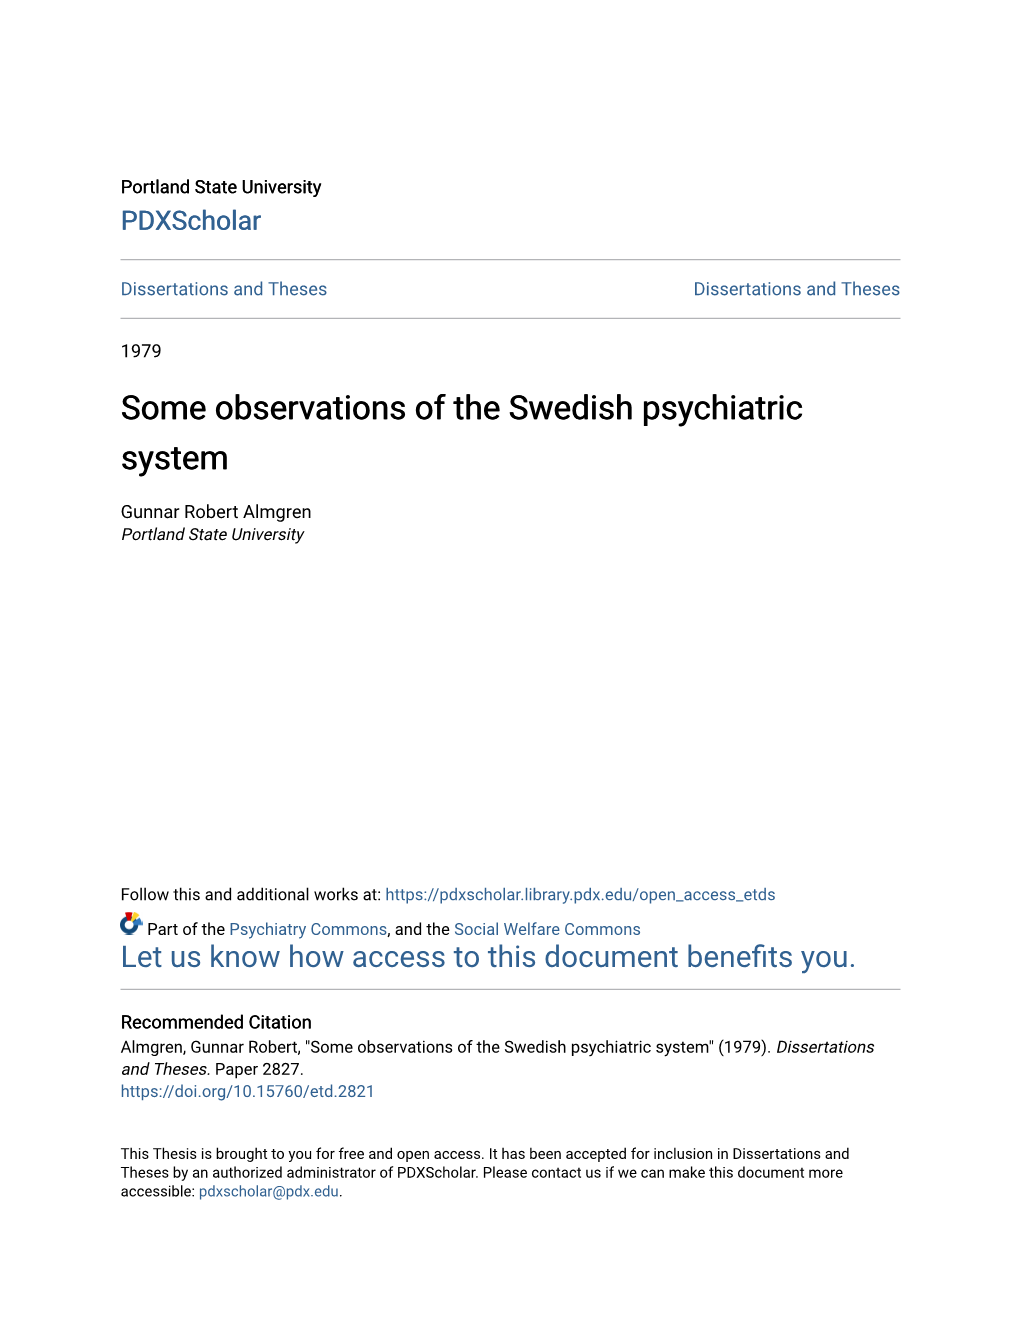 Some Observations of the Swedish Psychiatric System